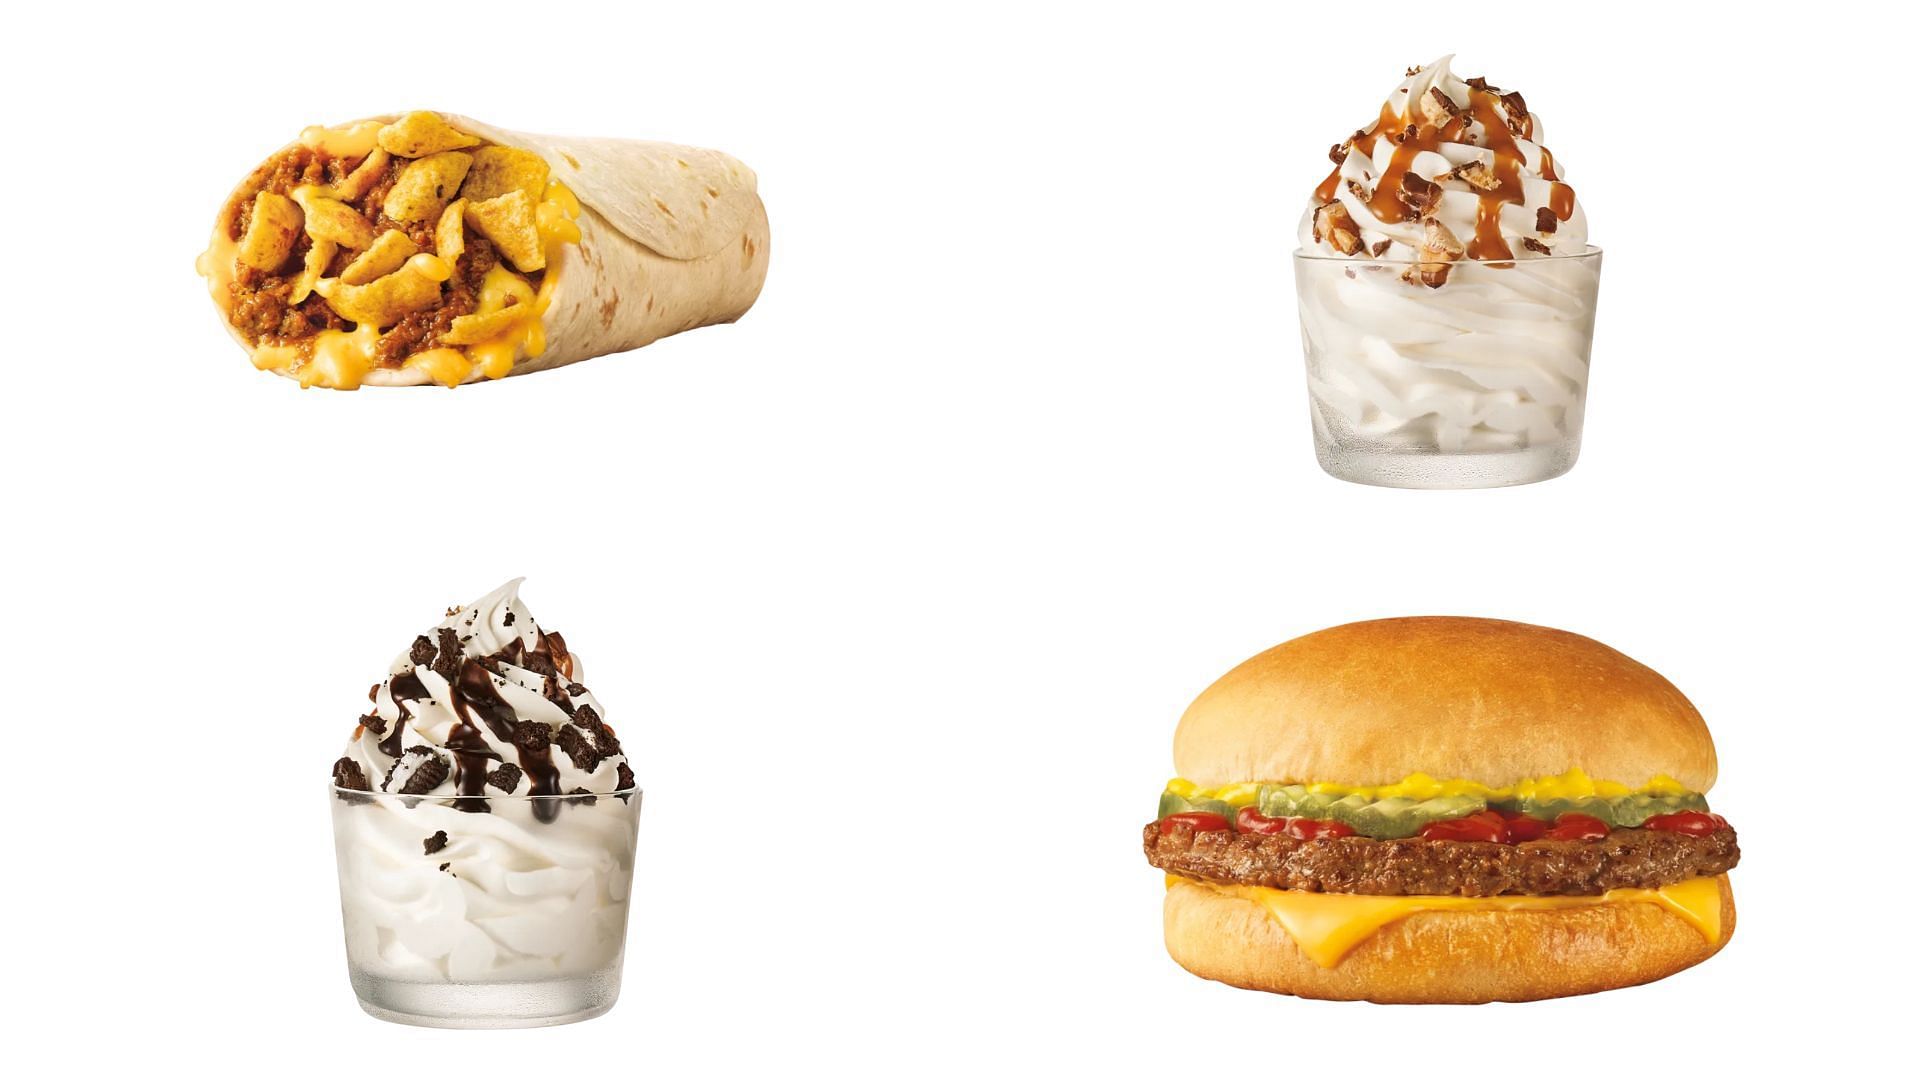 SONIC Brings Affordable Value to the Drive-In with New Under $2 Craves